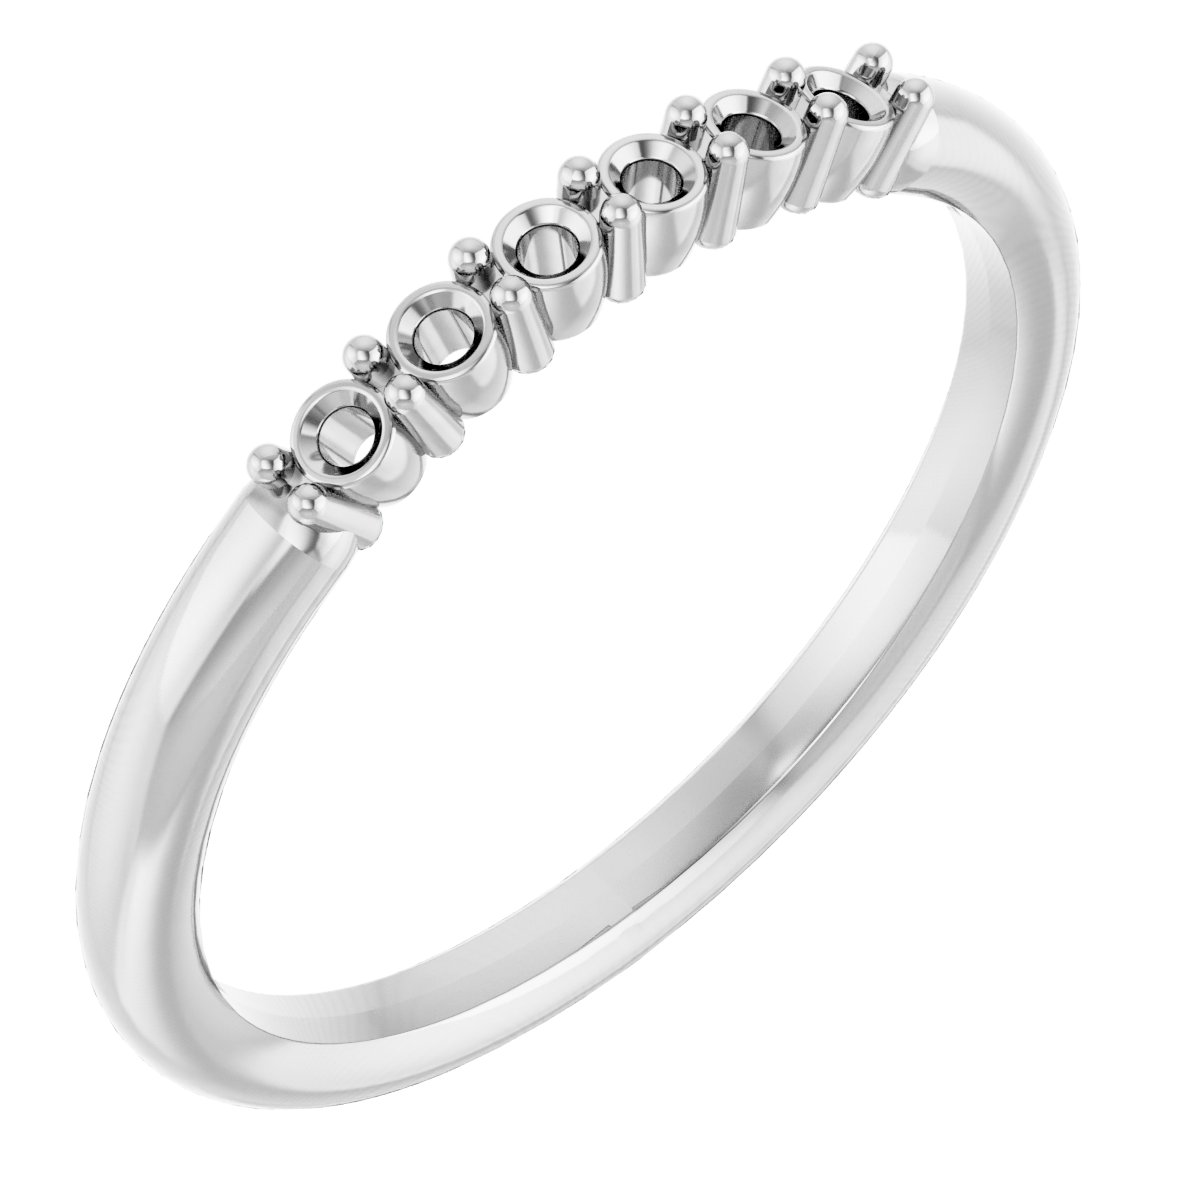 Continuum Sterling Silver Stackable Ring Mounting